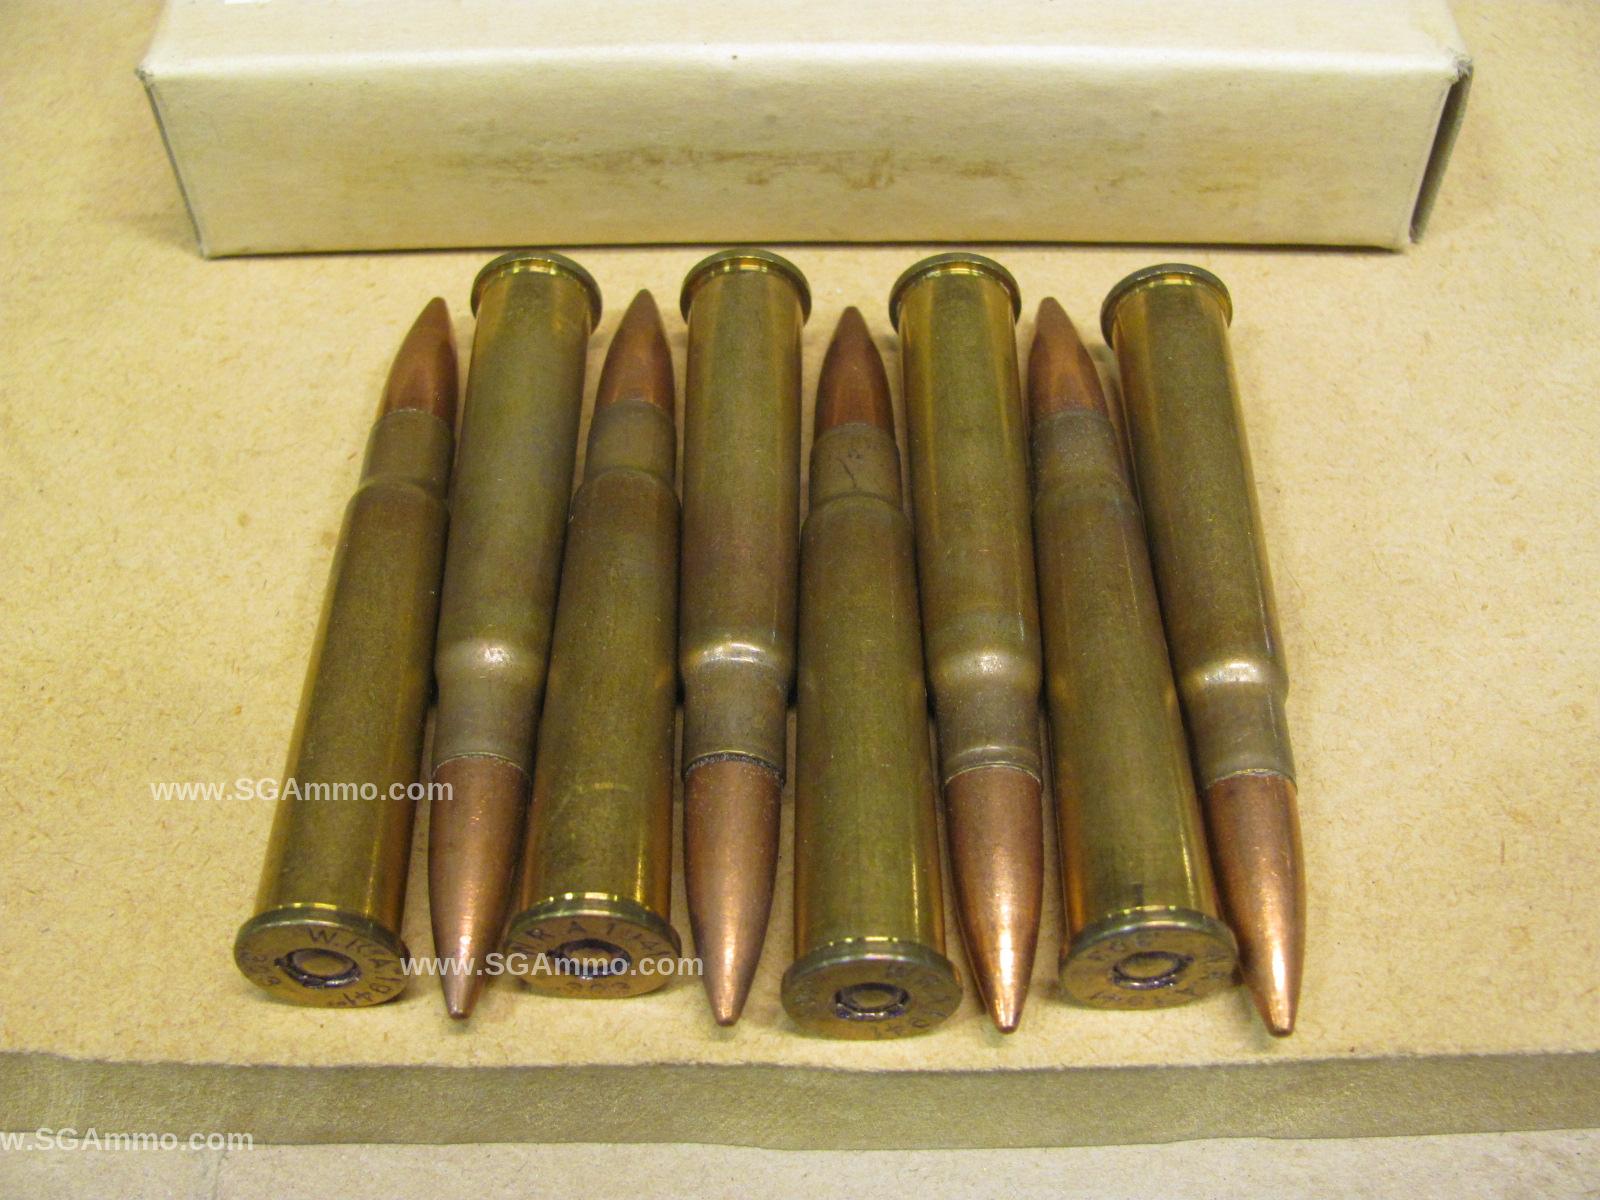 100 Round Pack - 303 British 174 Grain Full Patch (FMJ) Type Ball Ammo Winchester WW2 Era Surplus Ammo - Sold AS-IS - For Collectors